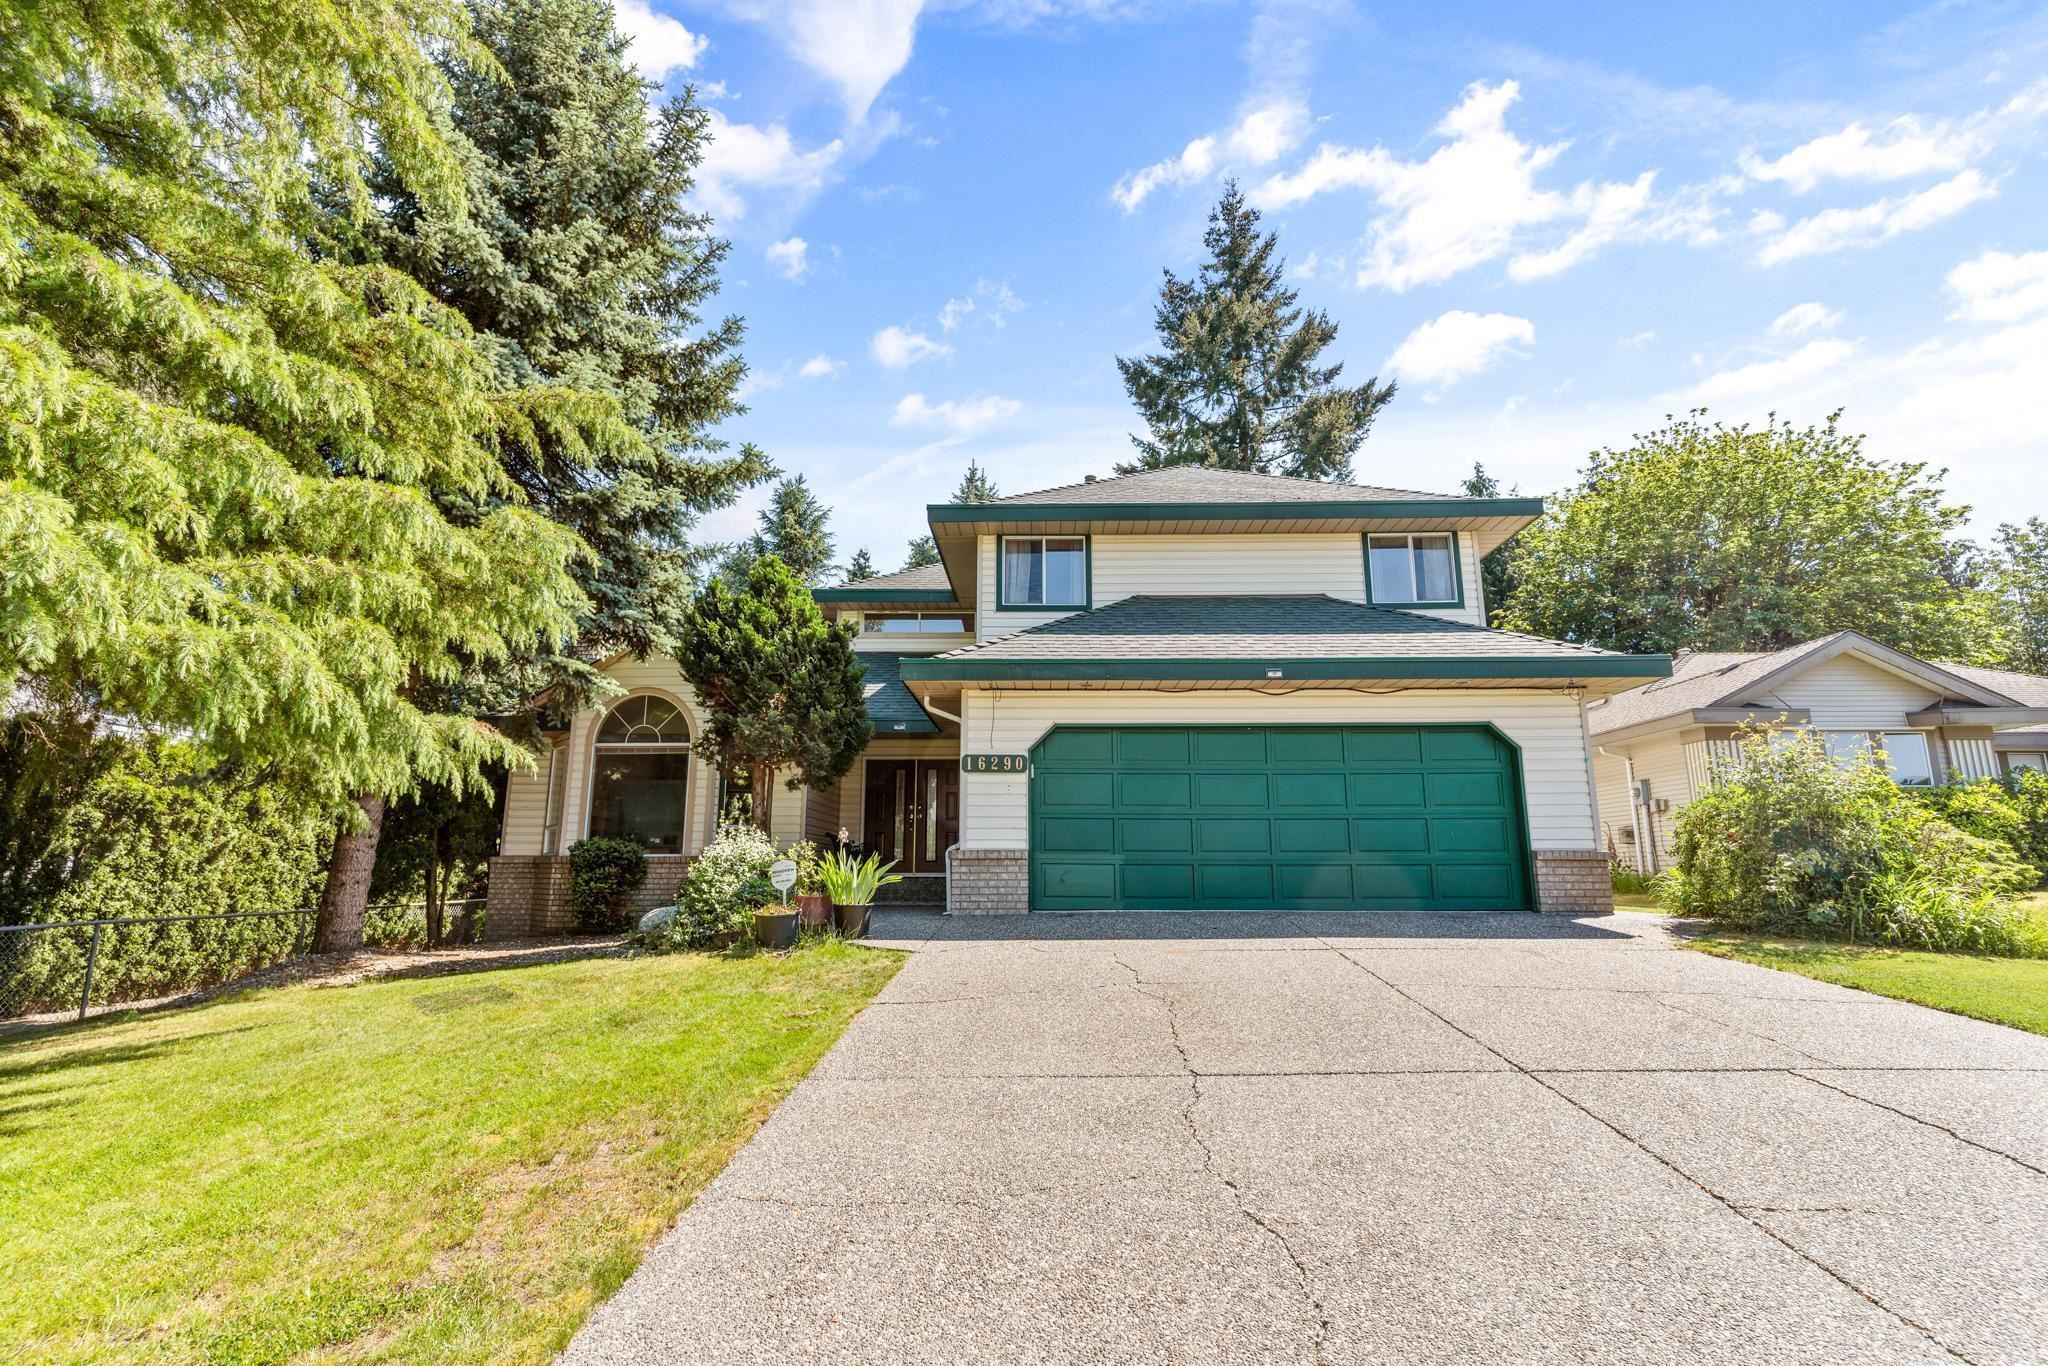 I have sold a property at 16290 86B AVE in Surrey
